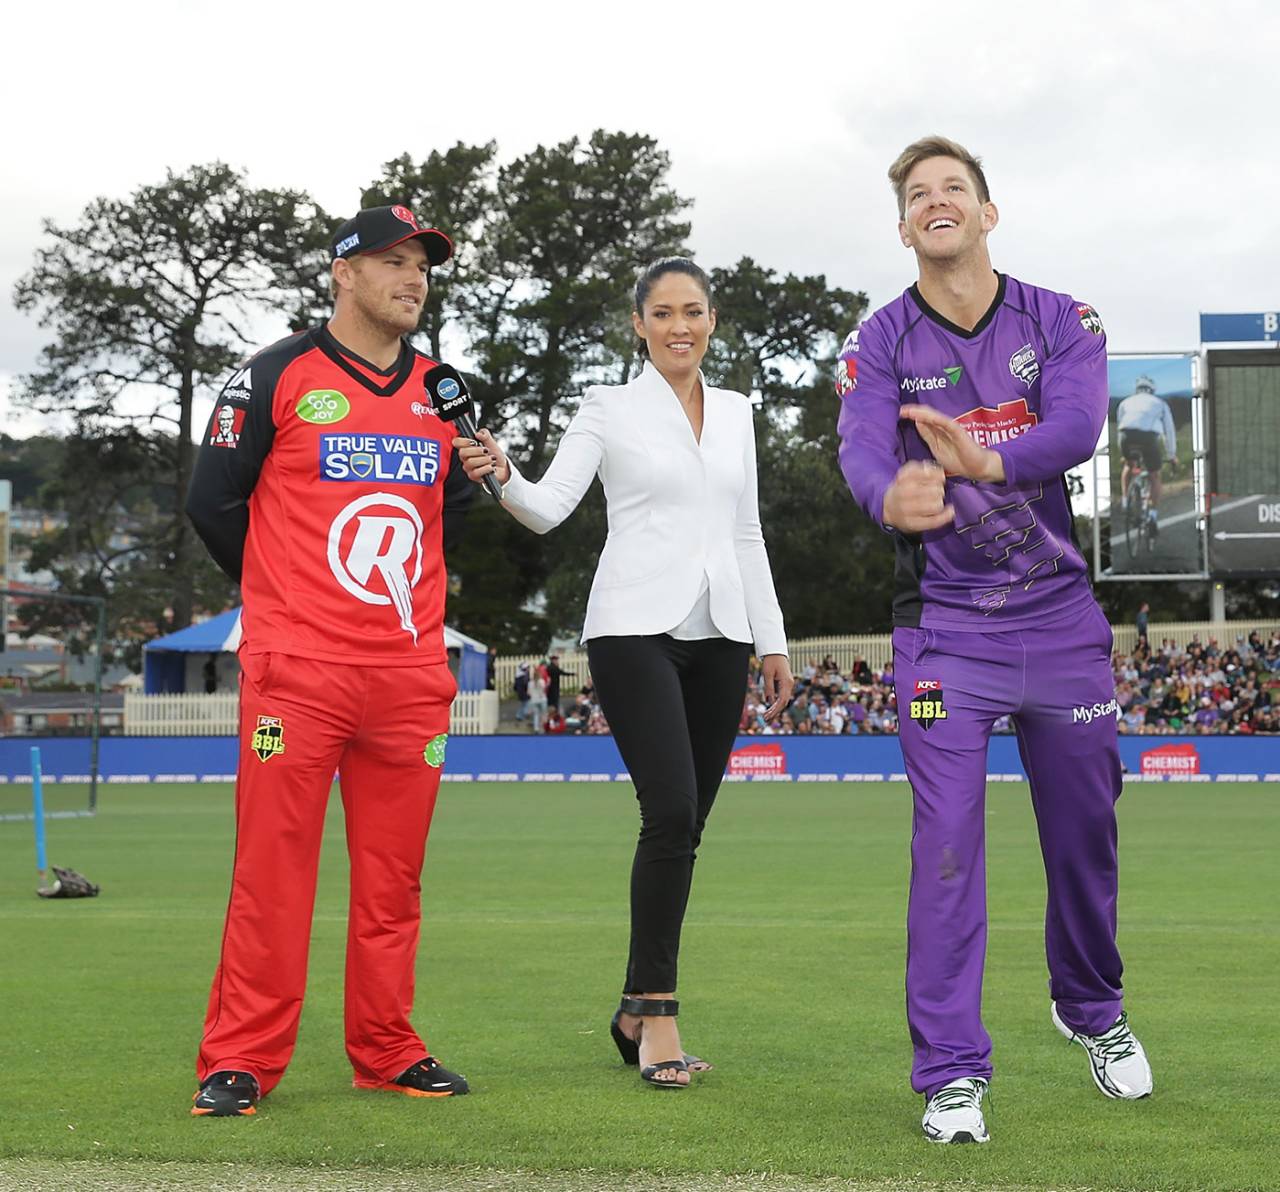 Before the storm: McLaughlin at the Hurricanes v Renegades toss with the captains&nbsp;&nbsp;&bull;&nbsp;&nbsp;Getty Images